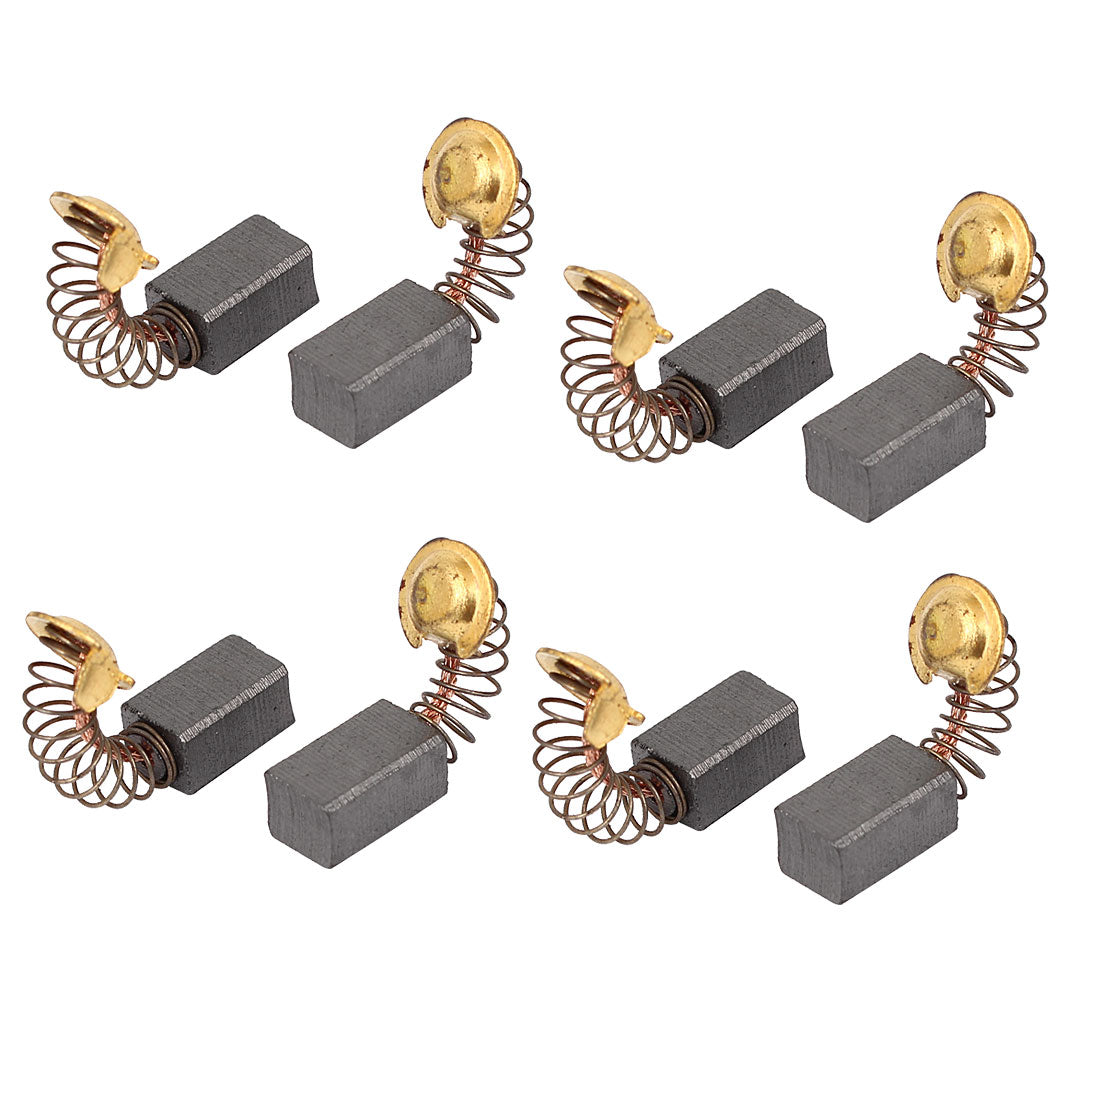 uxcell Uxcell 8 Pcs Replacement Motor Carbon Brushes 13mm x 7mm x 6mm for Electric Motors